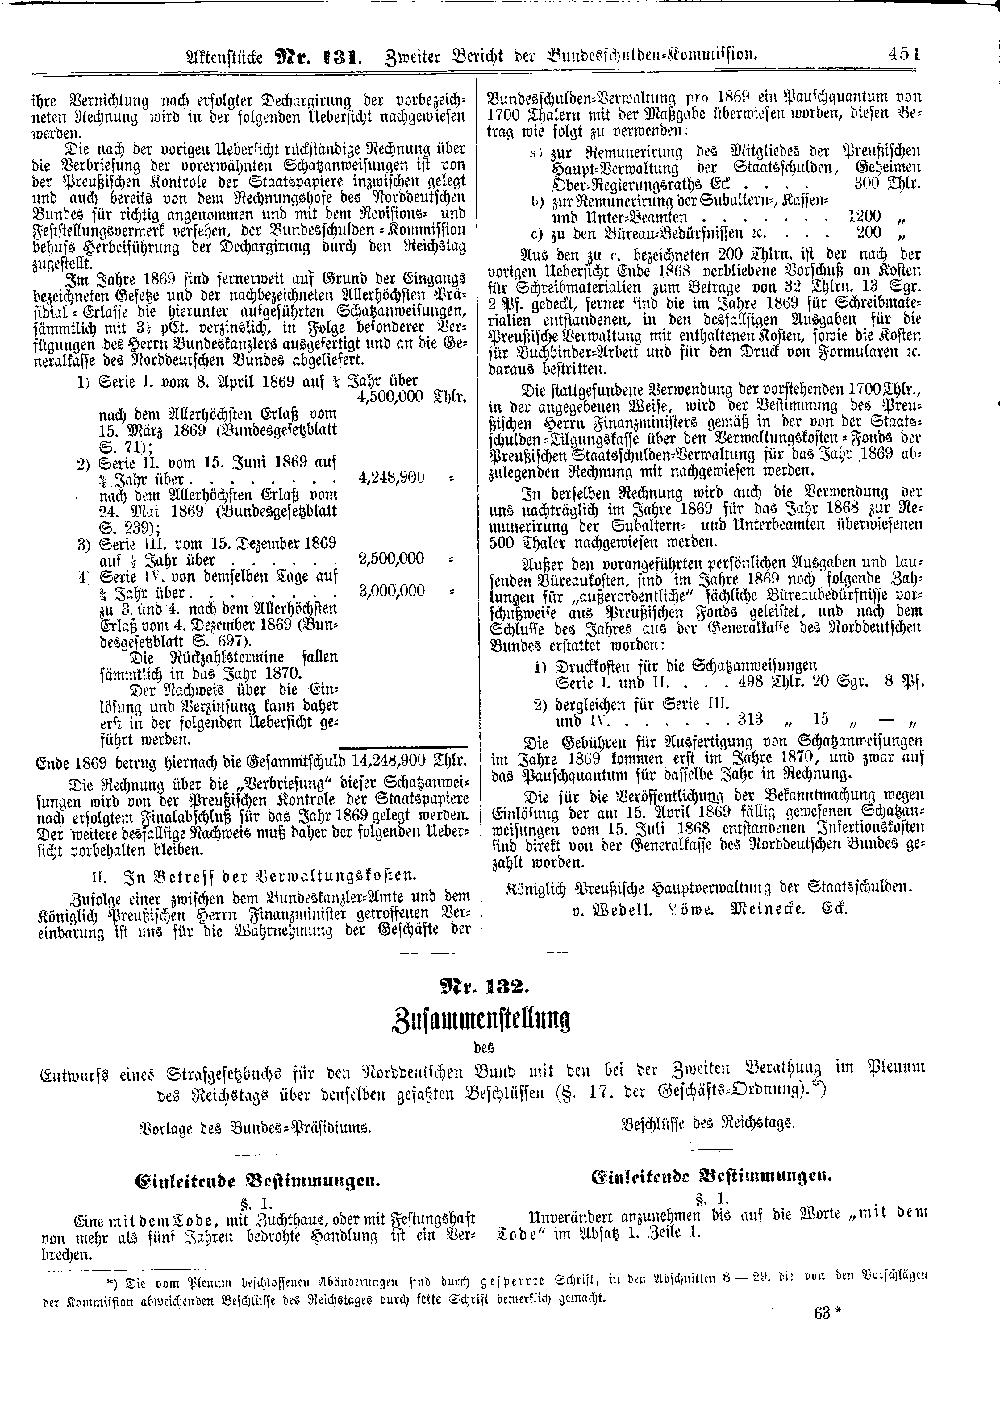 Scan of page 451